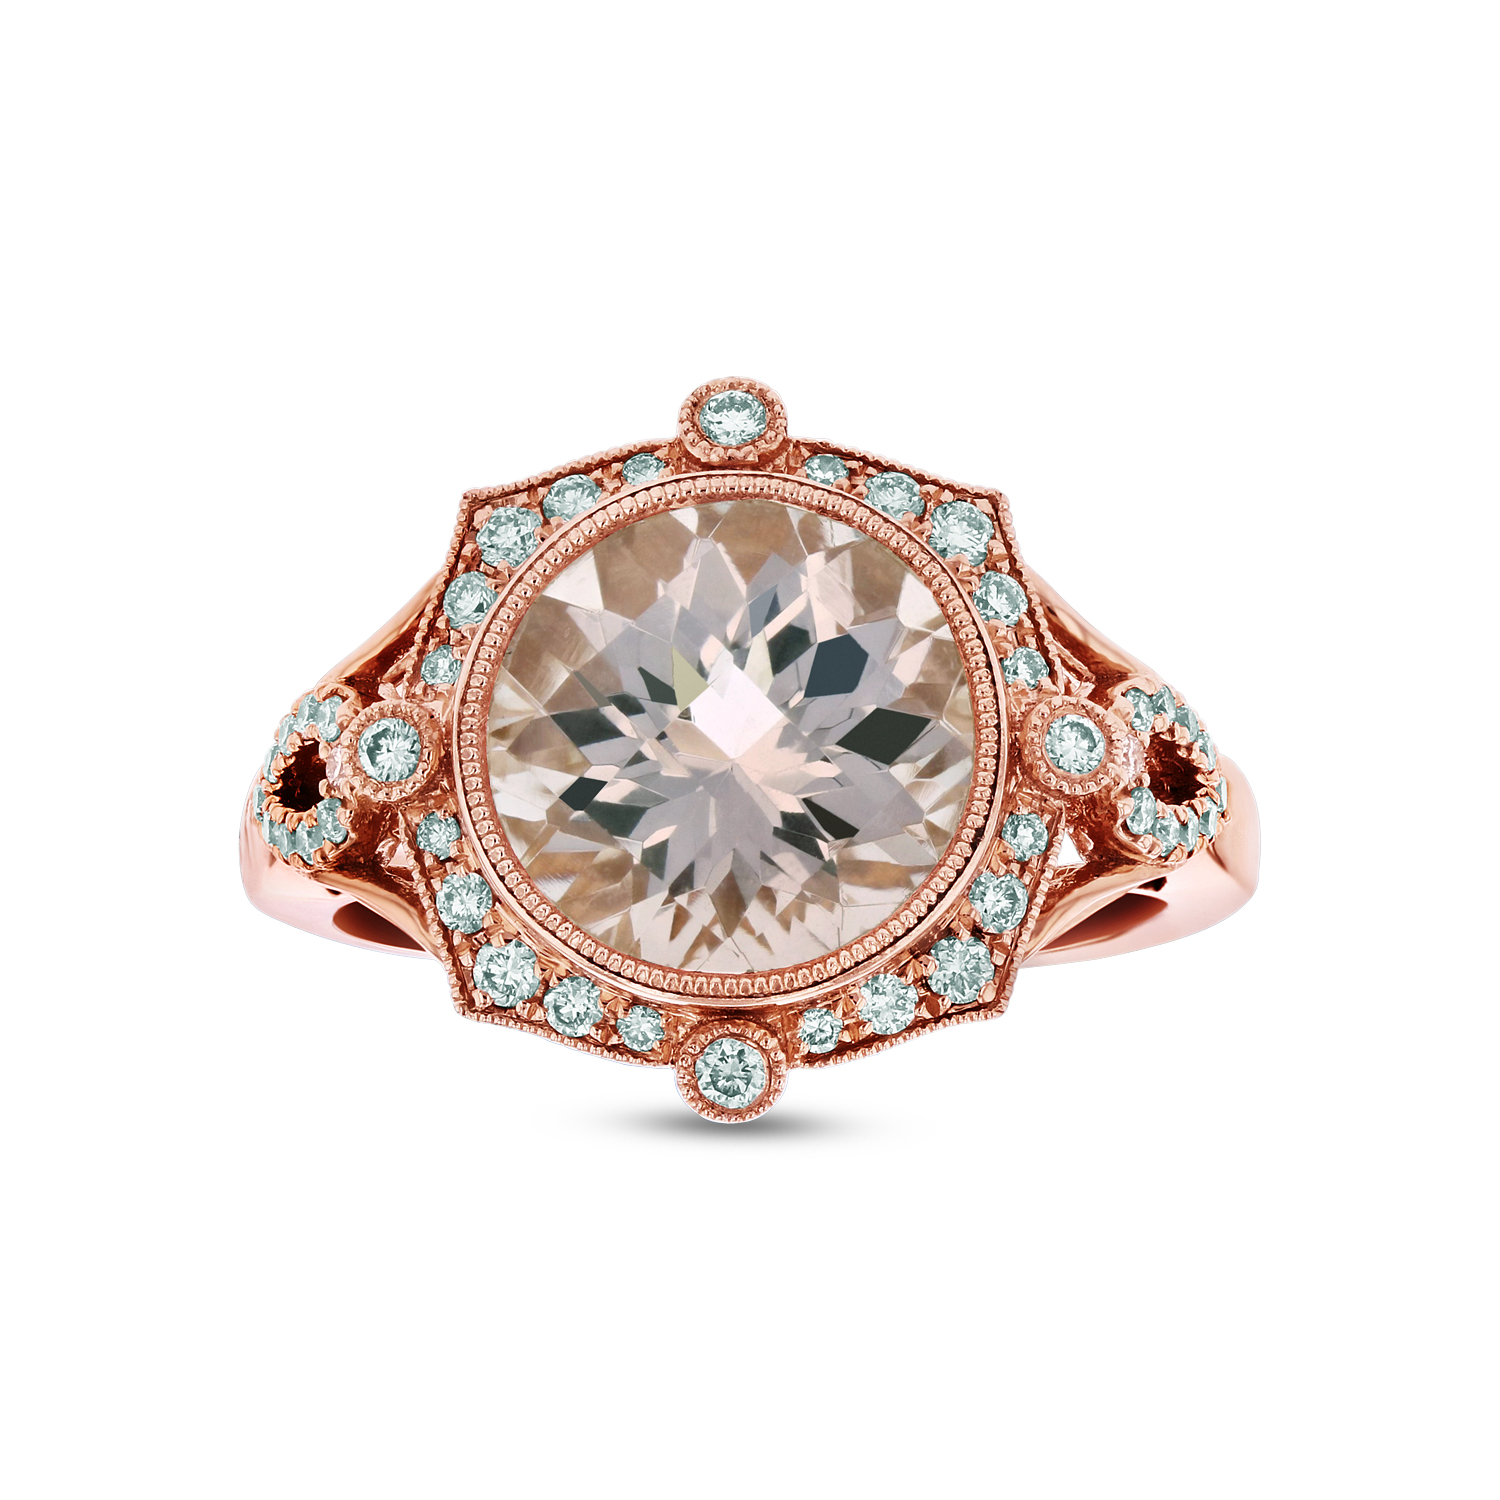 View Diamond and 10mm Round Morganite Ring in 14k Rose Gold